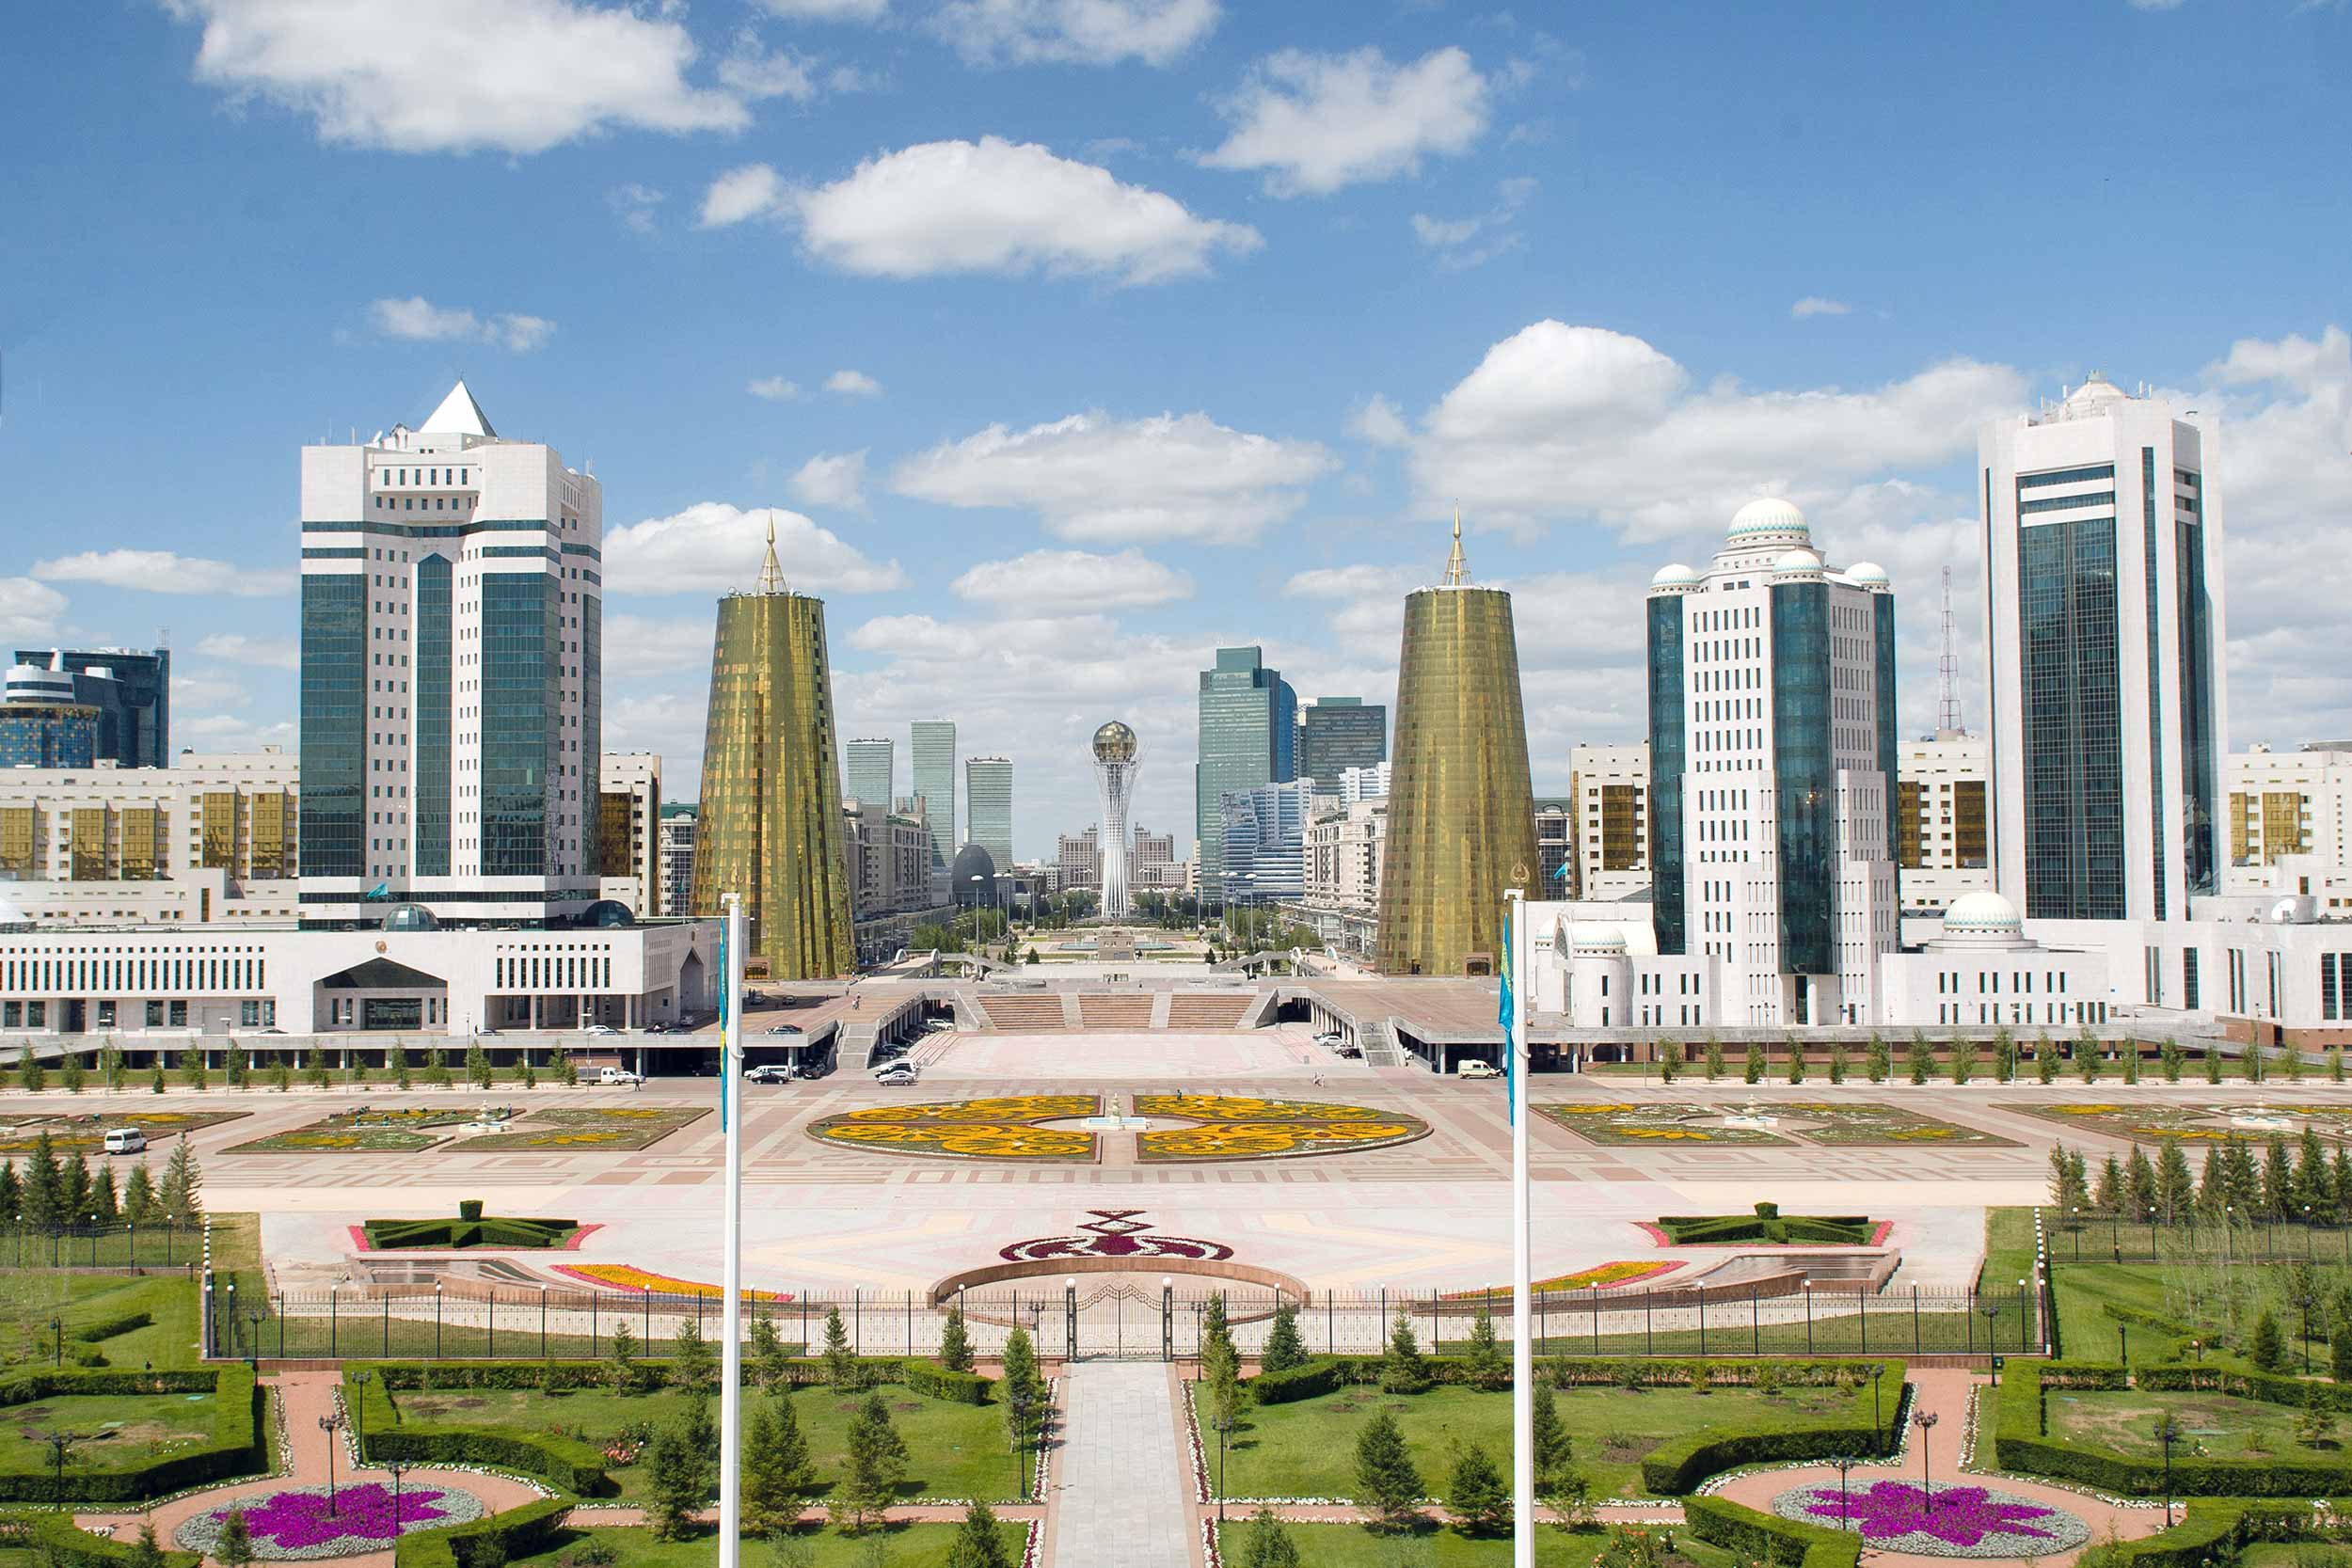 A view of central Kazakstan's capital Nur-Sultan, with the 105-metre tall Baiterek tower on the horizon. Previously known as Astana, meaning "capital city" in Kazakh, the city of 1 million was renamed on 20 March 2019 as a tribute to the long-ruling Kazakh President Nursultan Nazarbayev, shortly after his resignation. © Leon Neal - Pool/Getty Images